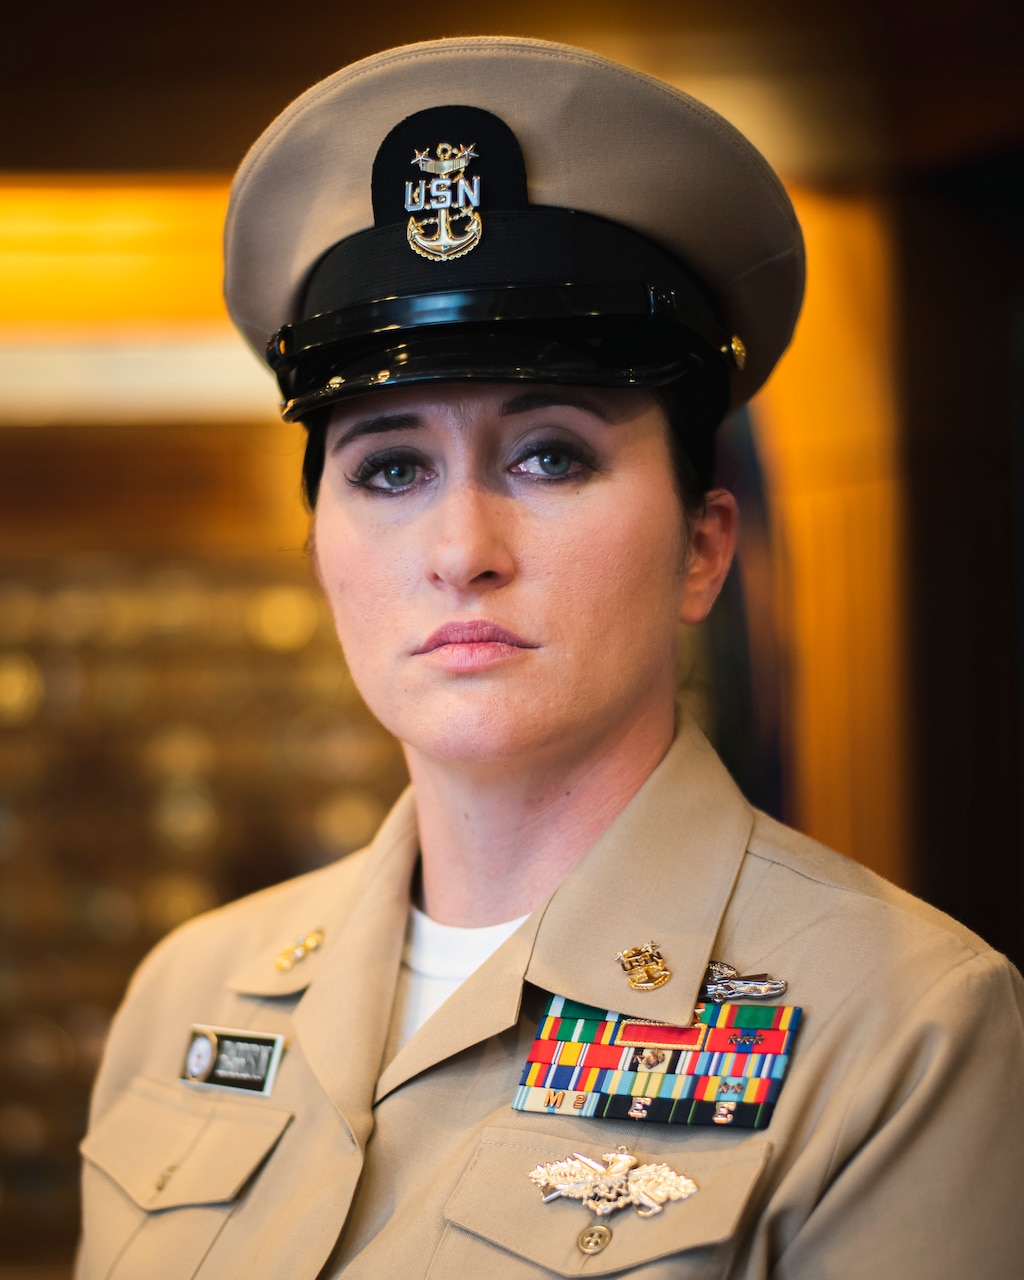 230428-N-TH560-1254 WASHINGTON (April 28, 2023) Master Chief Gunner’s Mate Jessica Harrison, from Twin Falls, Idaho, is the first woman in the U.S. Navy to achieve the rank of E-9 in the gunner’s mate rating, a career field dating back to the birth of the Navy. 
When asked how she did it, Harrison said, “not by myself; it's my Sailors, my mentors, my friends.” Harrison was promoted during a small ceremony inside the Delbert D. Black National Chief’s Mess at the U.S. Navy Memorial in Washington, D.C., April 28, 2023. (U.S. Navy photo by Mass Communication Specialist 1st Class Jeanette Mullinax)